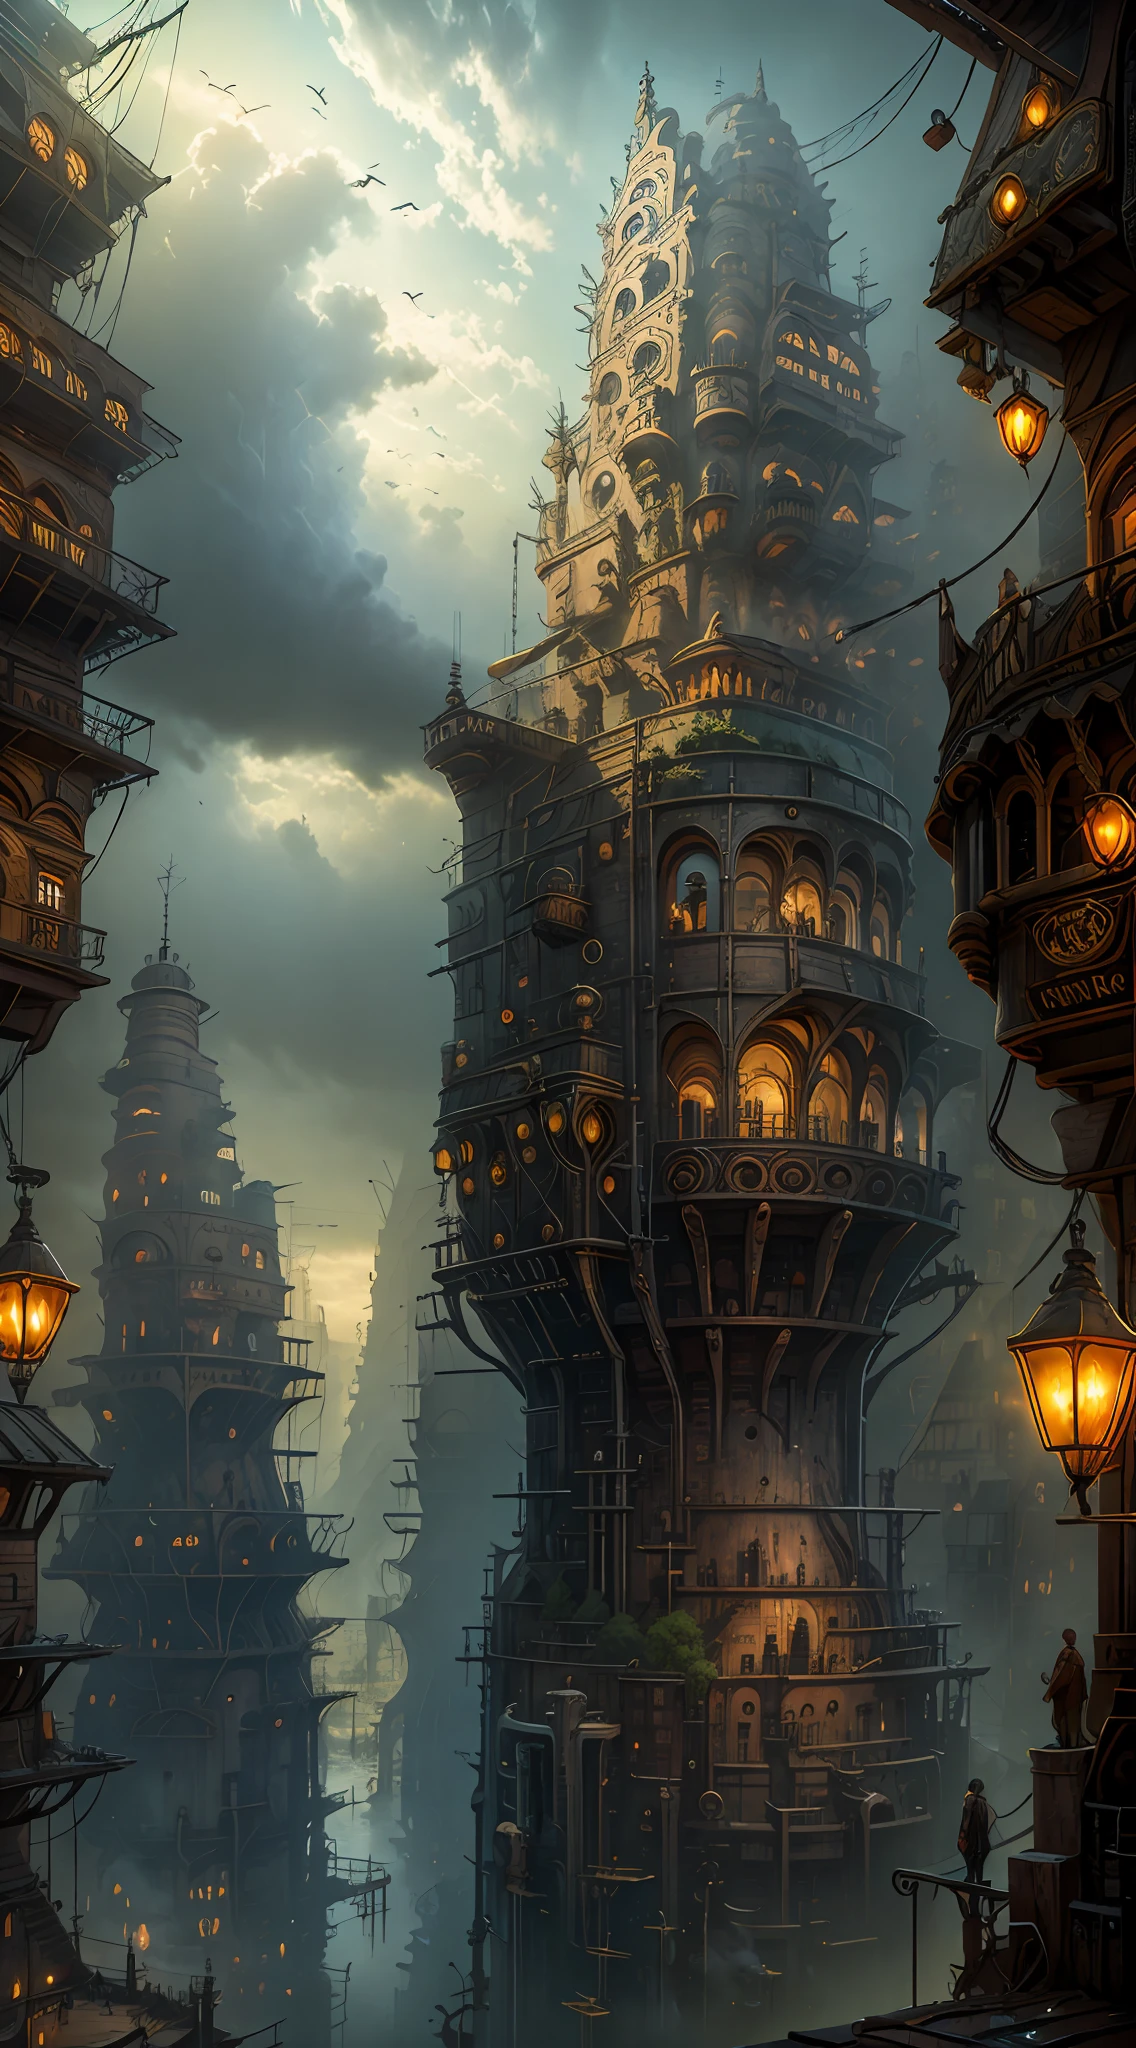 Industrial age city，Deep valley in the middle，architectural streets，bazaars，Bridges，Rainy sky，Airship in the sky，Steampunk futuristic style，western architecture，Isometric scenario，Outstanding details，